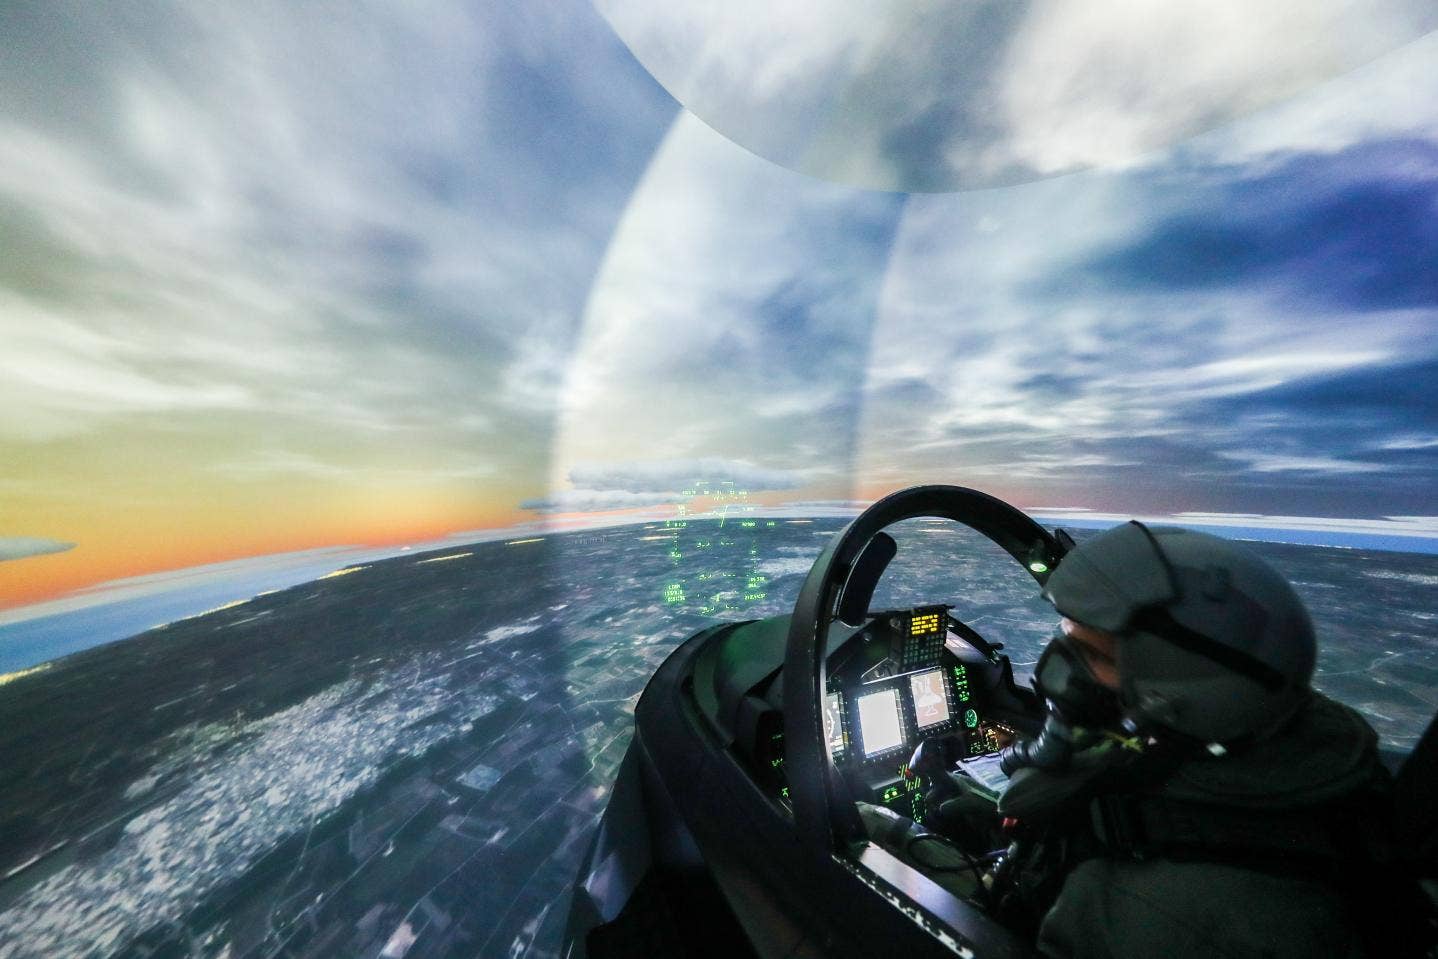 Based in Sardinia, Italy, the&nbsp;International Flight Training School&nbsp;(IFTS), a collaboration between defense contractor Leonardo and the Italian Air Force, is already a popular choice for training fighter pilots from a wide variety of countries. <em>Leonardo</em><br>